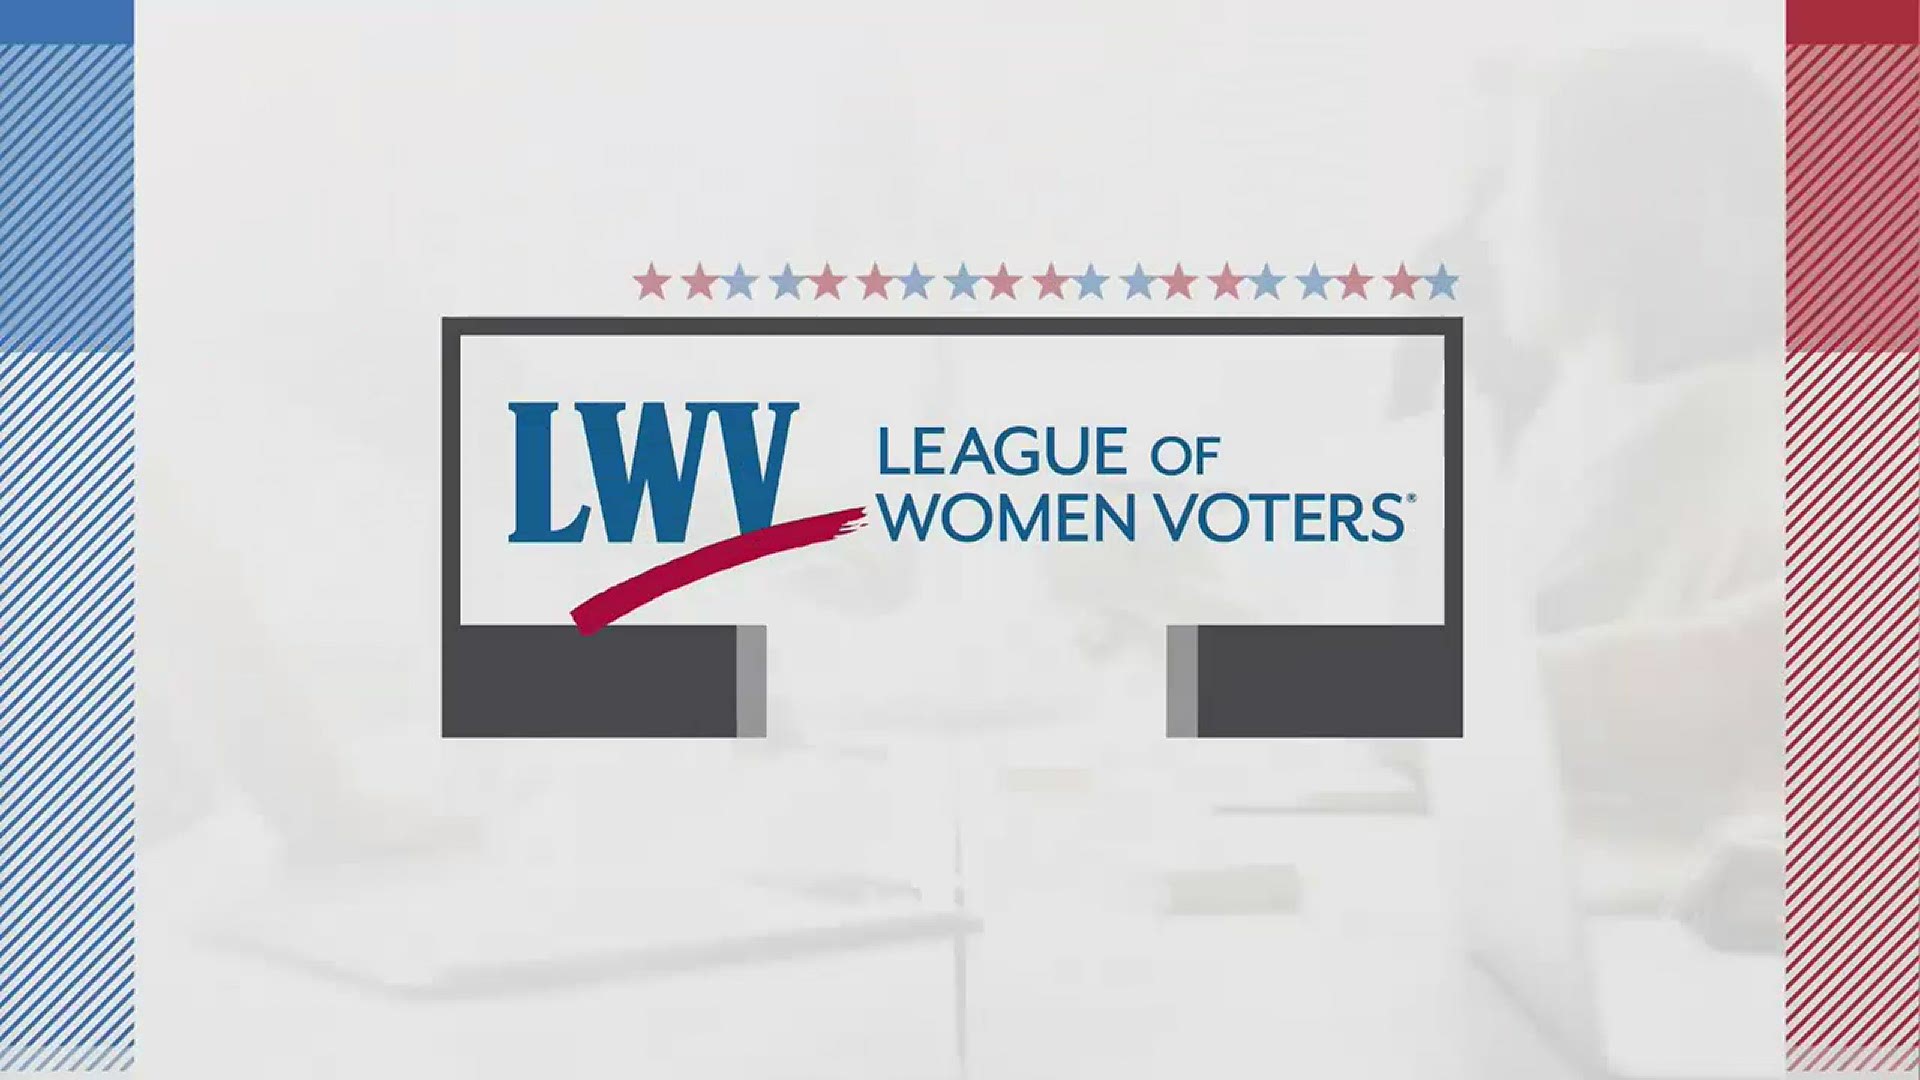 KIII-TV has partnered with the League of Women Voters-Corpus Christi to help make sure our community has the information they need before they hit the polls.